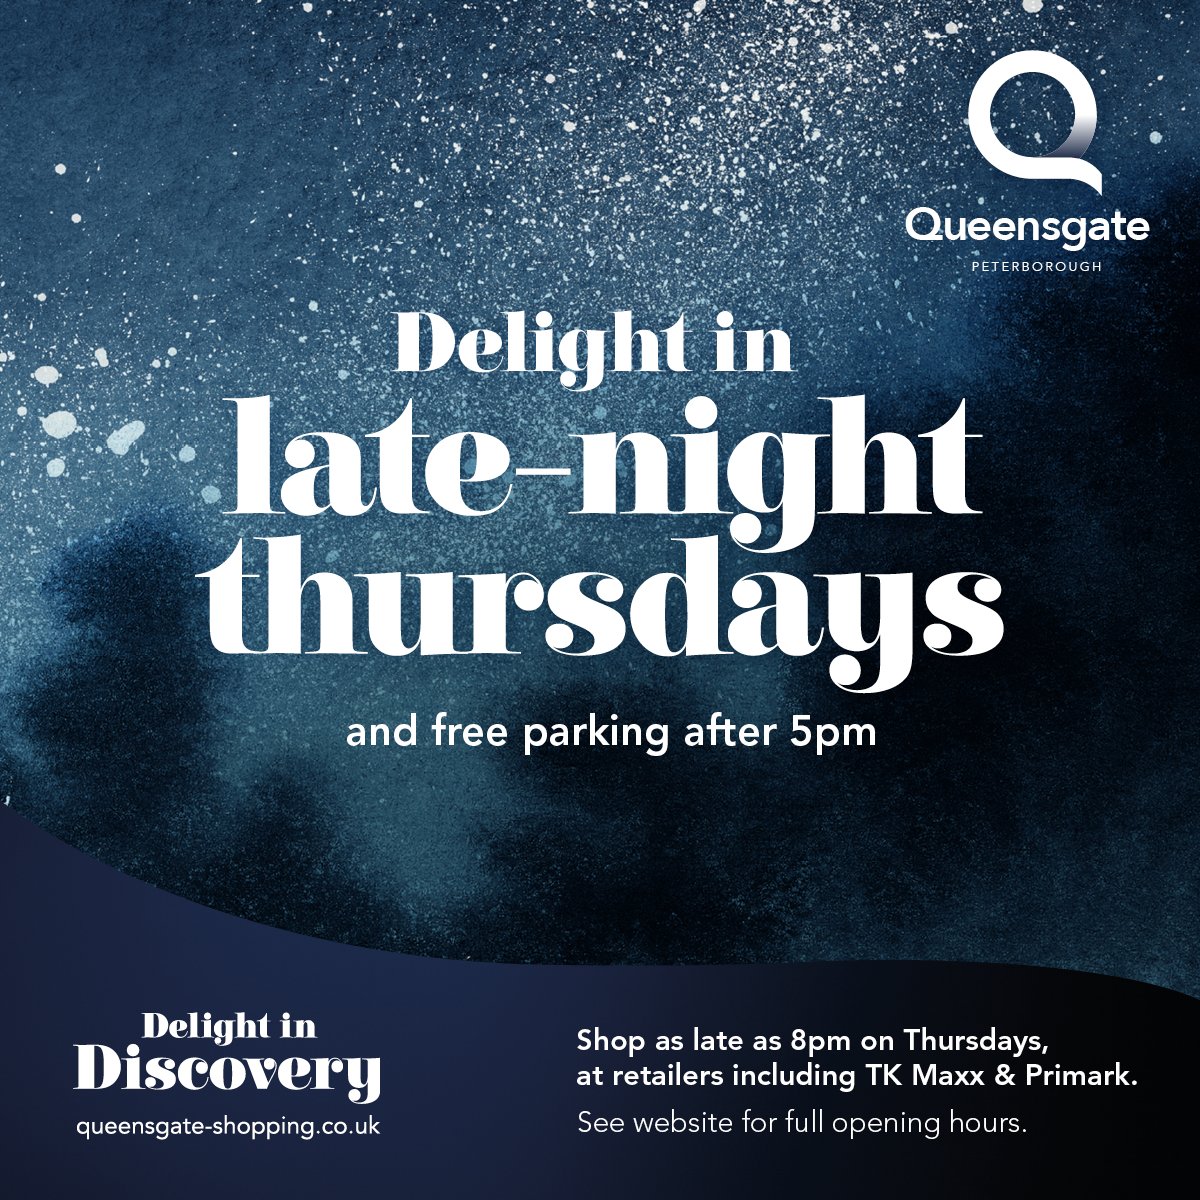 Don't forget, we're open for late night shopping every Thursday until 8pm* with FREE parking after 5pm! *Retailer hours may vary #latenightshopping #shoplocal #Cambridgeshire #Peterborough #Queensgate #QueensgatePeterborough #QueensgateShoppingCentre